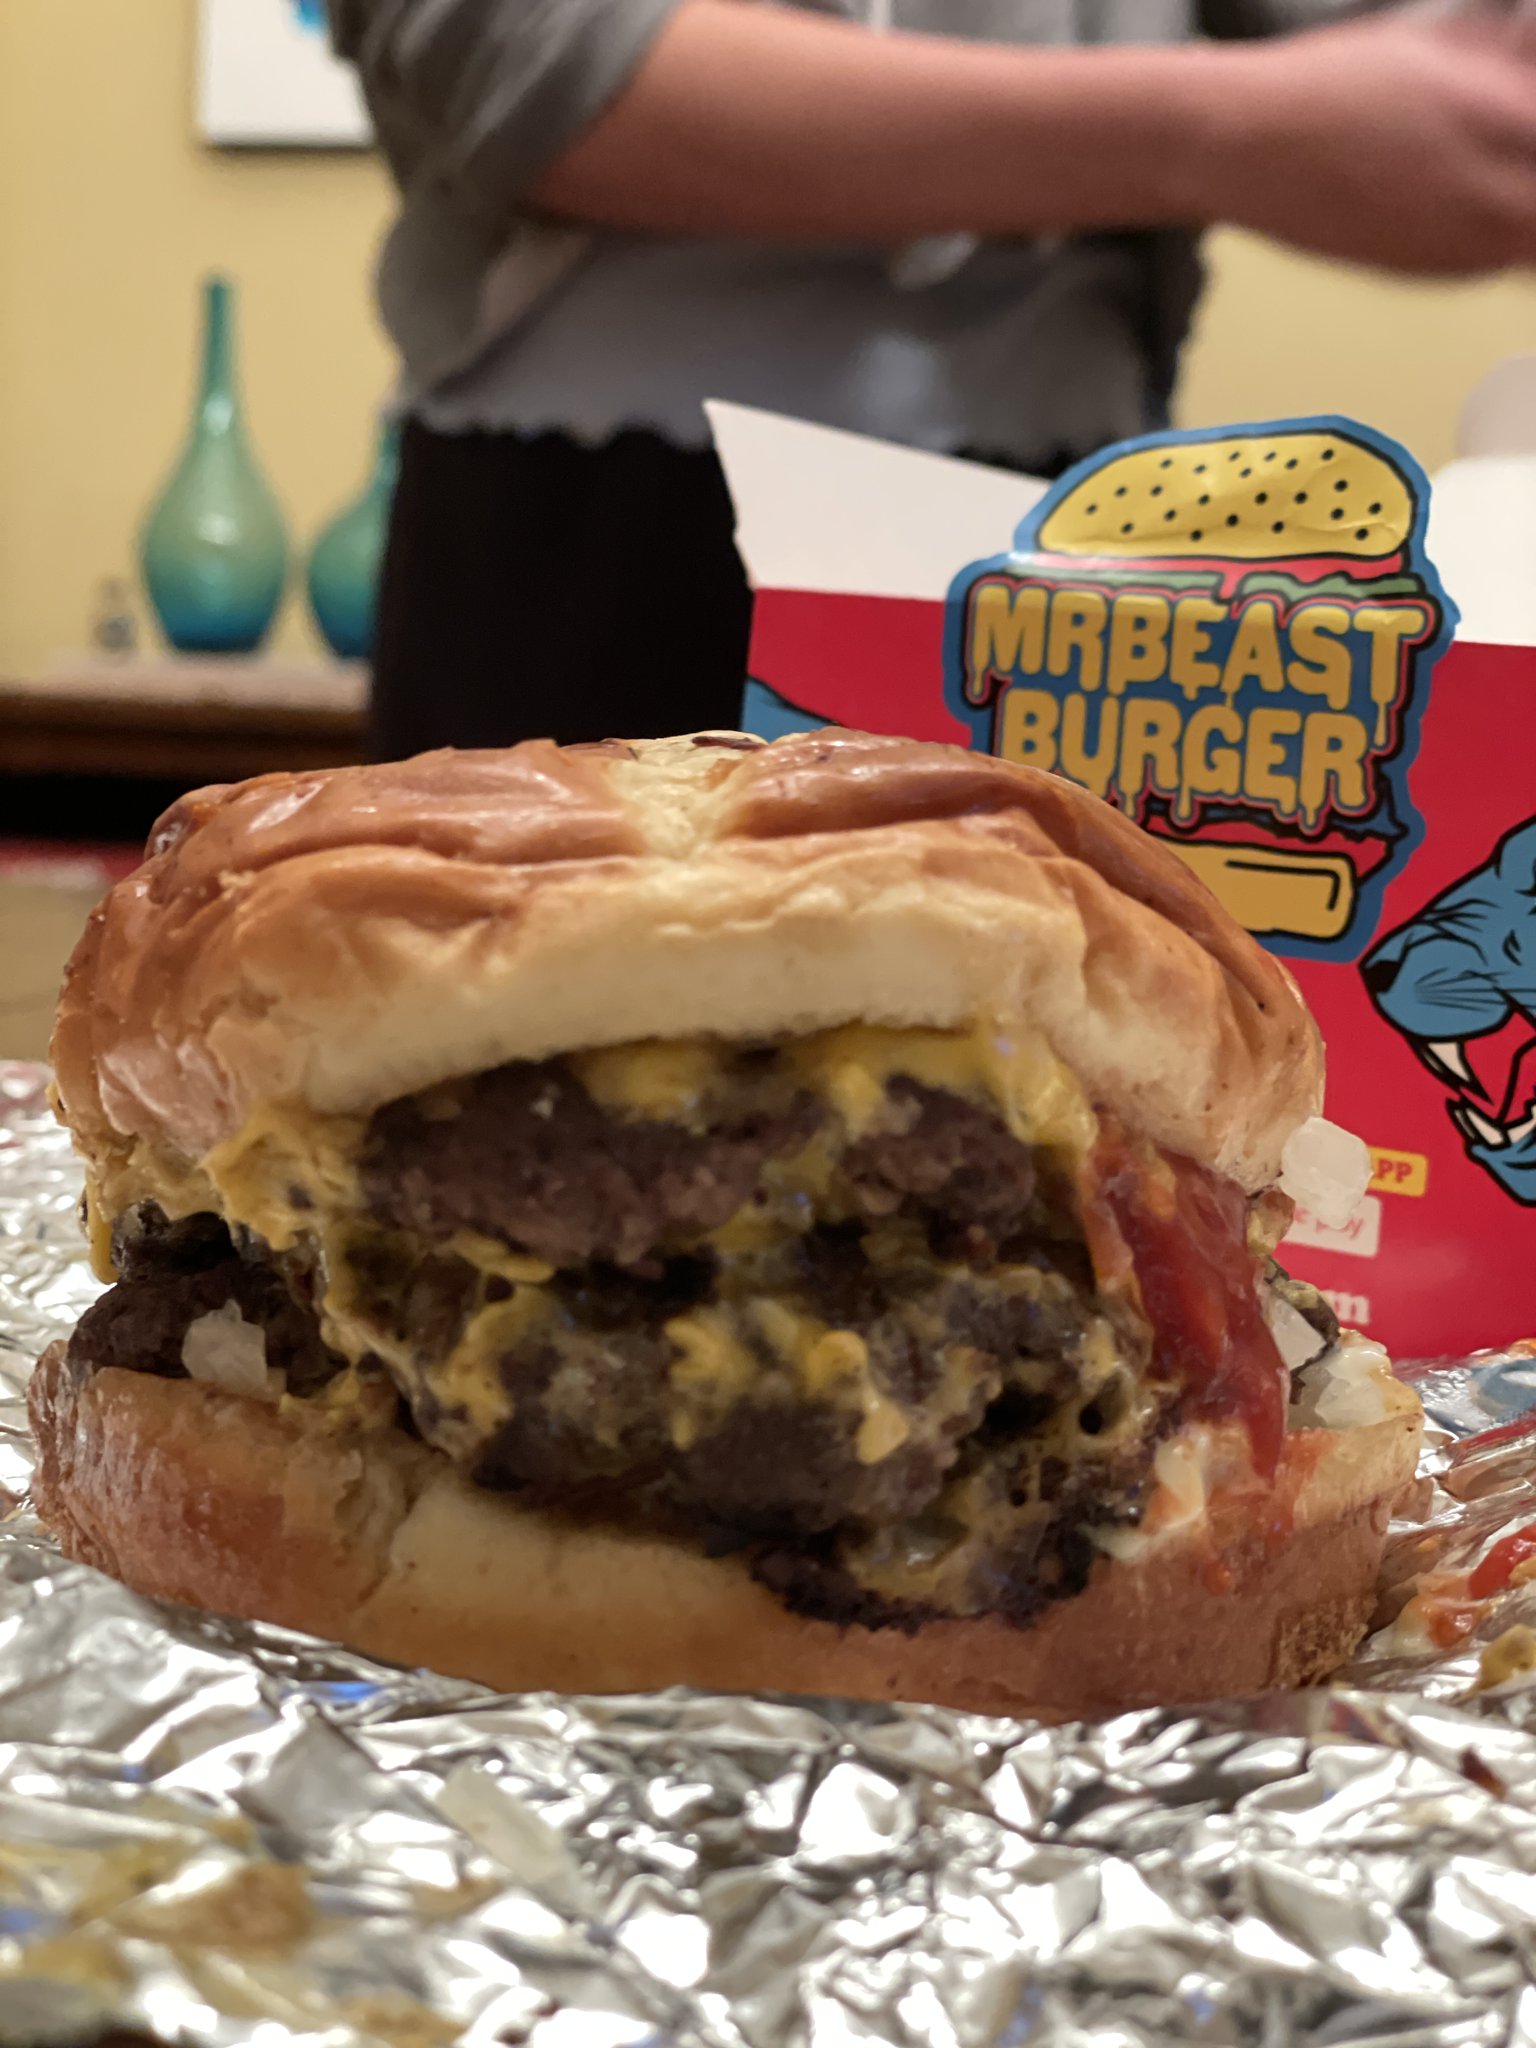 Star's MrBeast Burger Now Available in Tuscaloosa